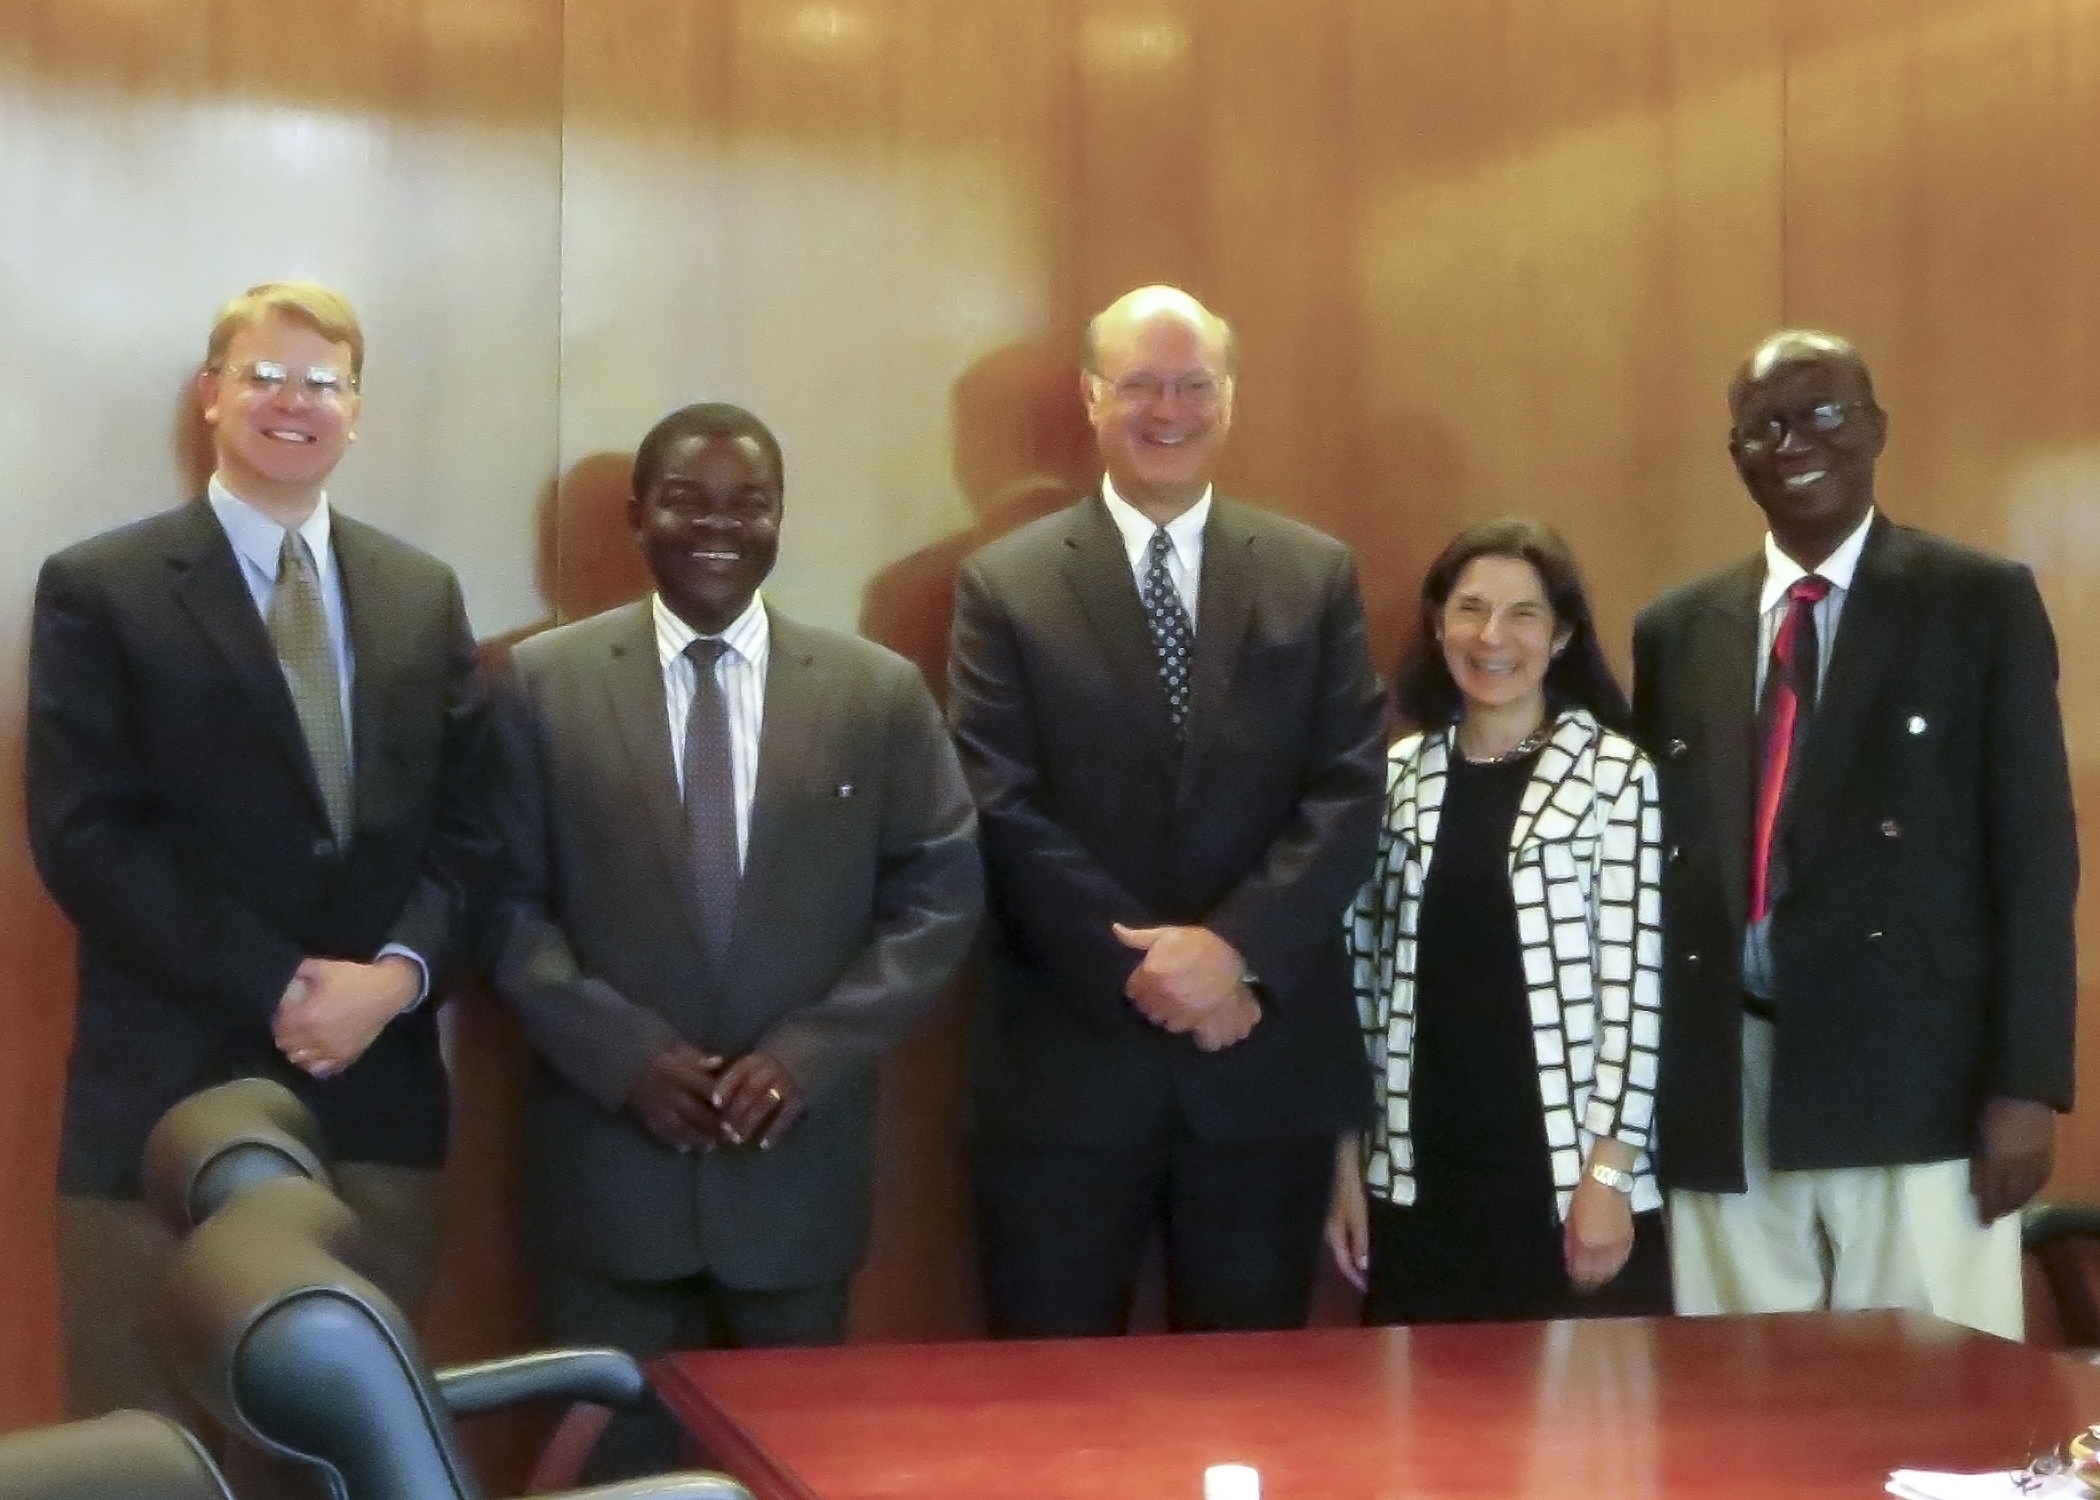 From left, Dr. Ben Fredrick, director of Global Health Center;  Kwaku Ansa-Asare, founder of MountCrest University, Ghana; Dr. Craig Hillemeier, CEO of Penn State Milton S. Hershey Medical Center, Penn State's senior vice president for health affairs, and dean of the Penn State College of Medicine; Dr. Terry Wolpaw, vice dean for education; and  Dr. Samuel Akortey Akor, dean of the MountCrest Medical School in Ghana.